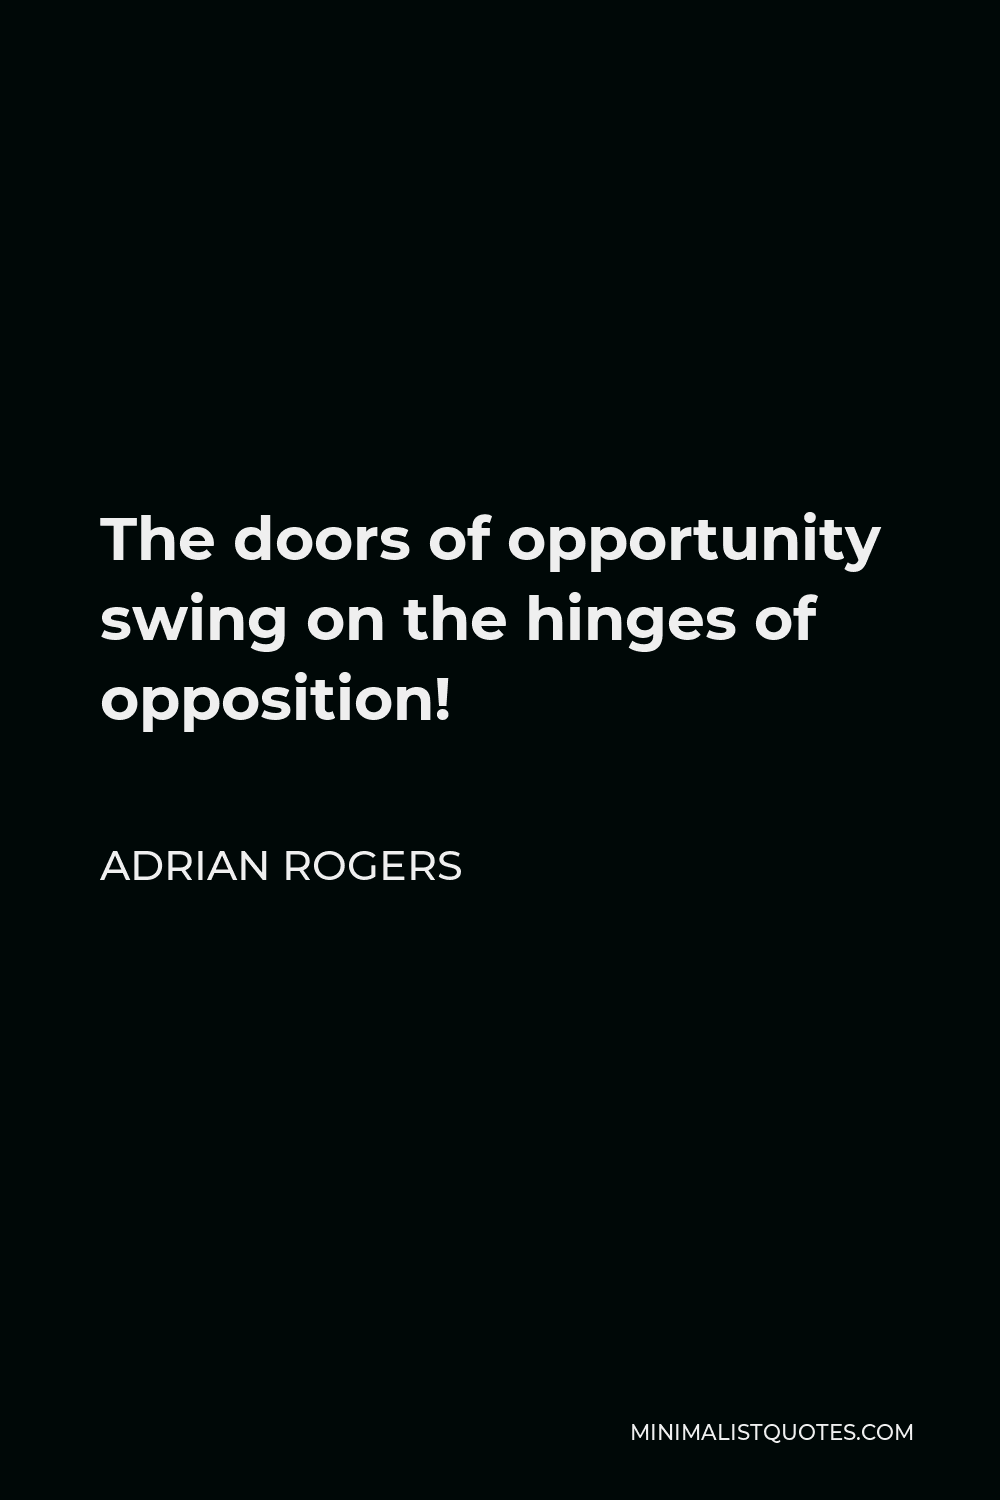 Adrian Rogers Quote - The doors of opportunity swing on the hinges of opposition!